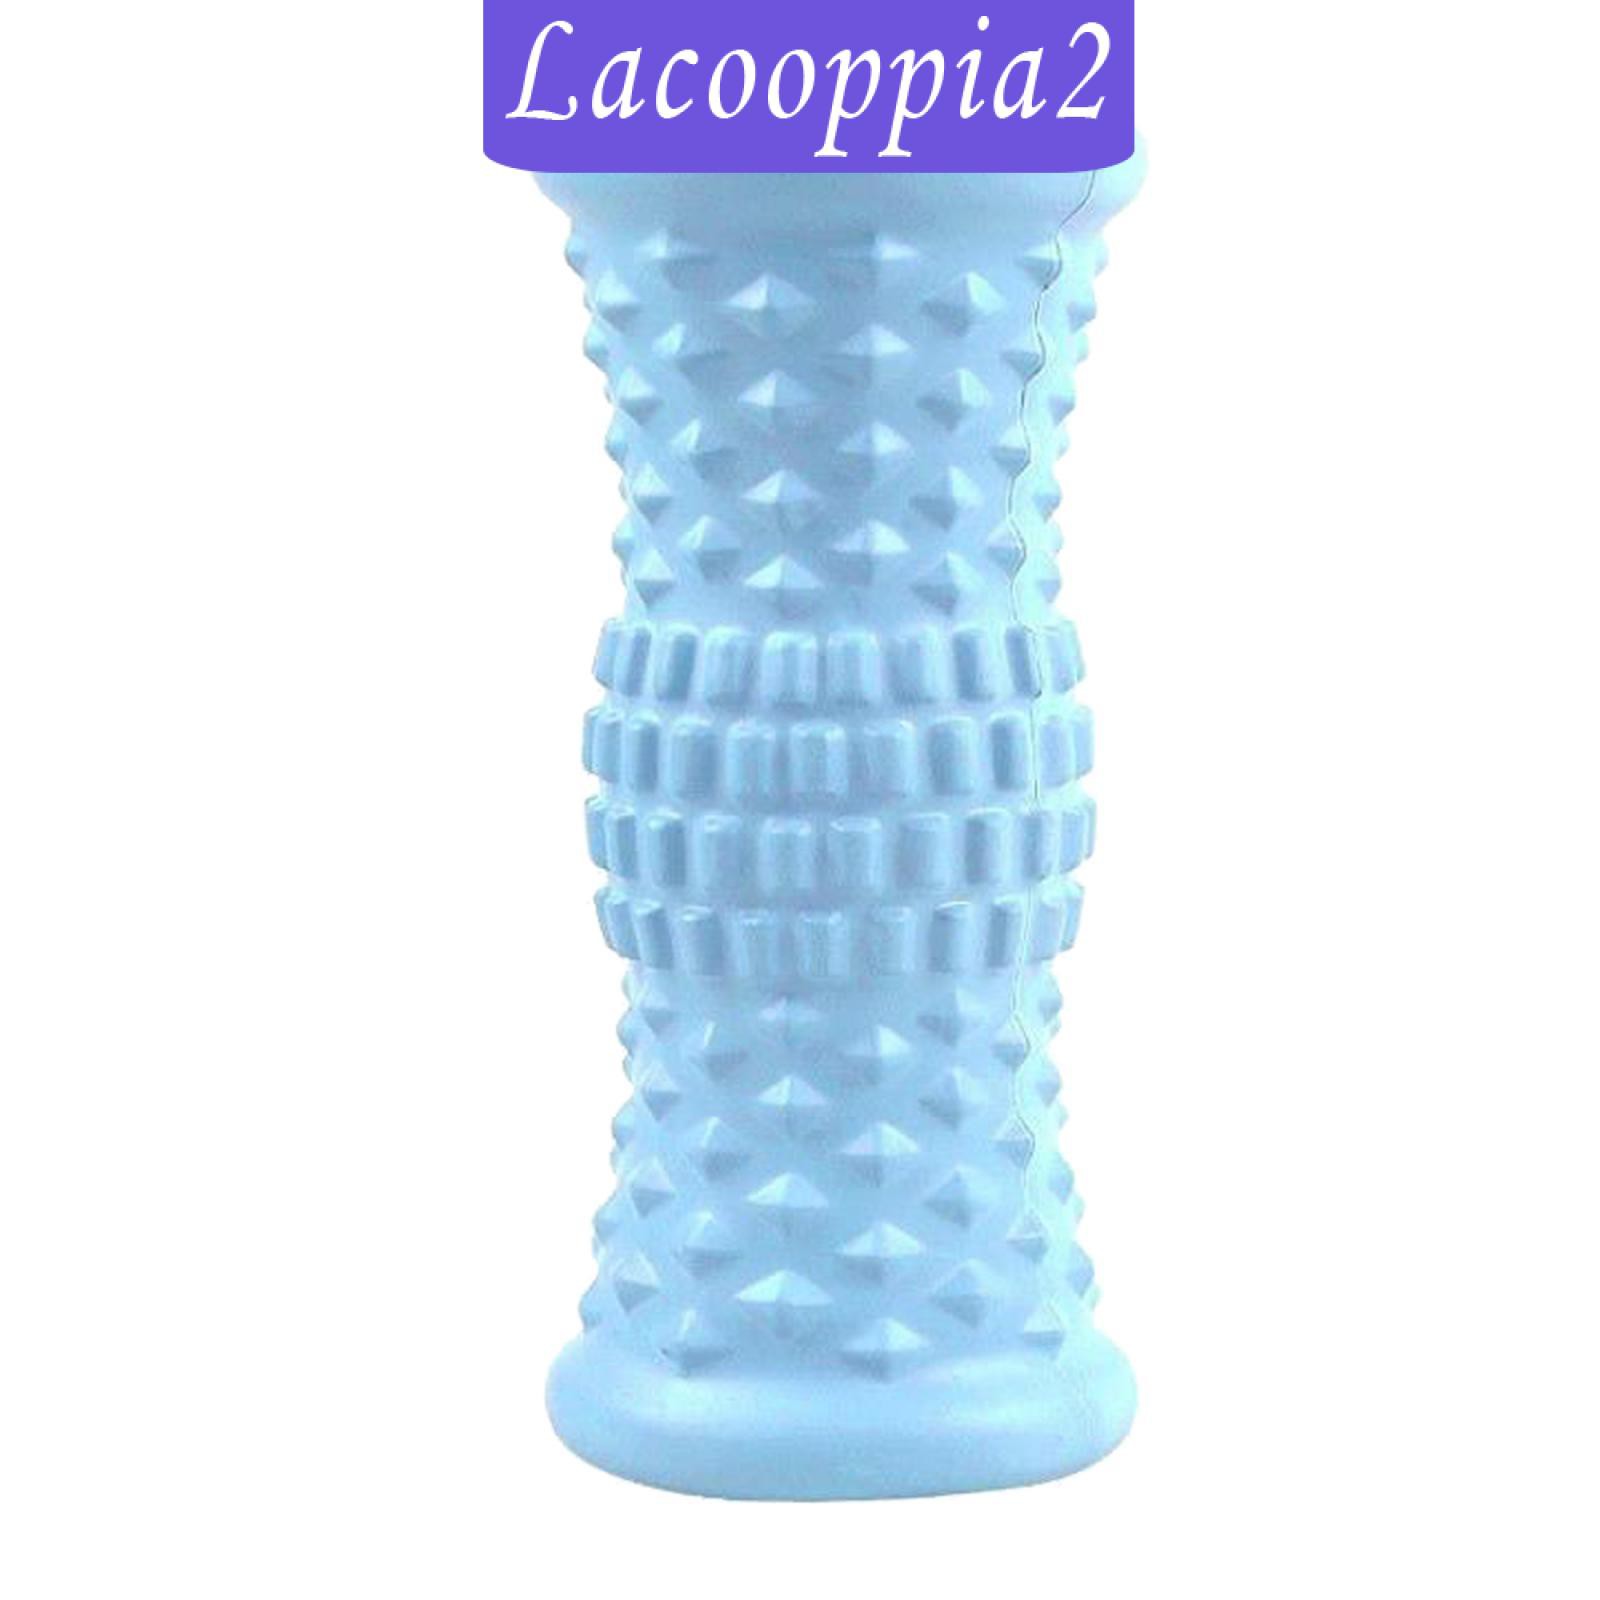 [LACOOPPIA2] Foot Roller Massage Tool Foot Massager Plantar Fasciitis Relief Full Body Relax